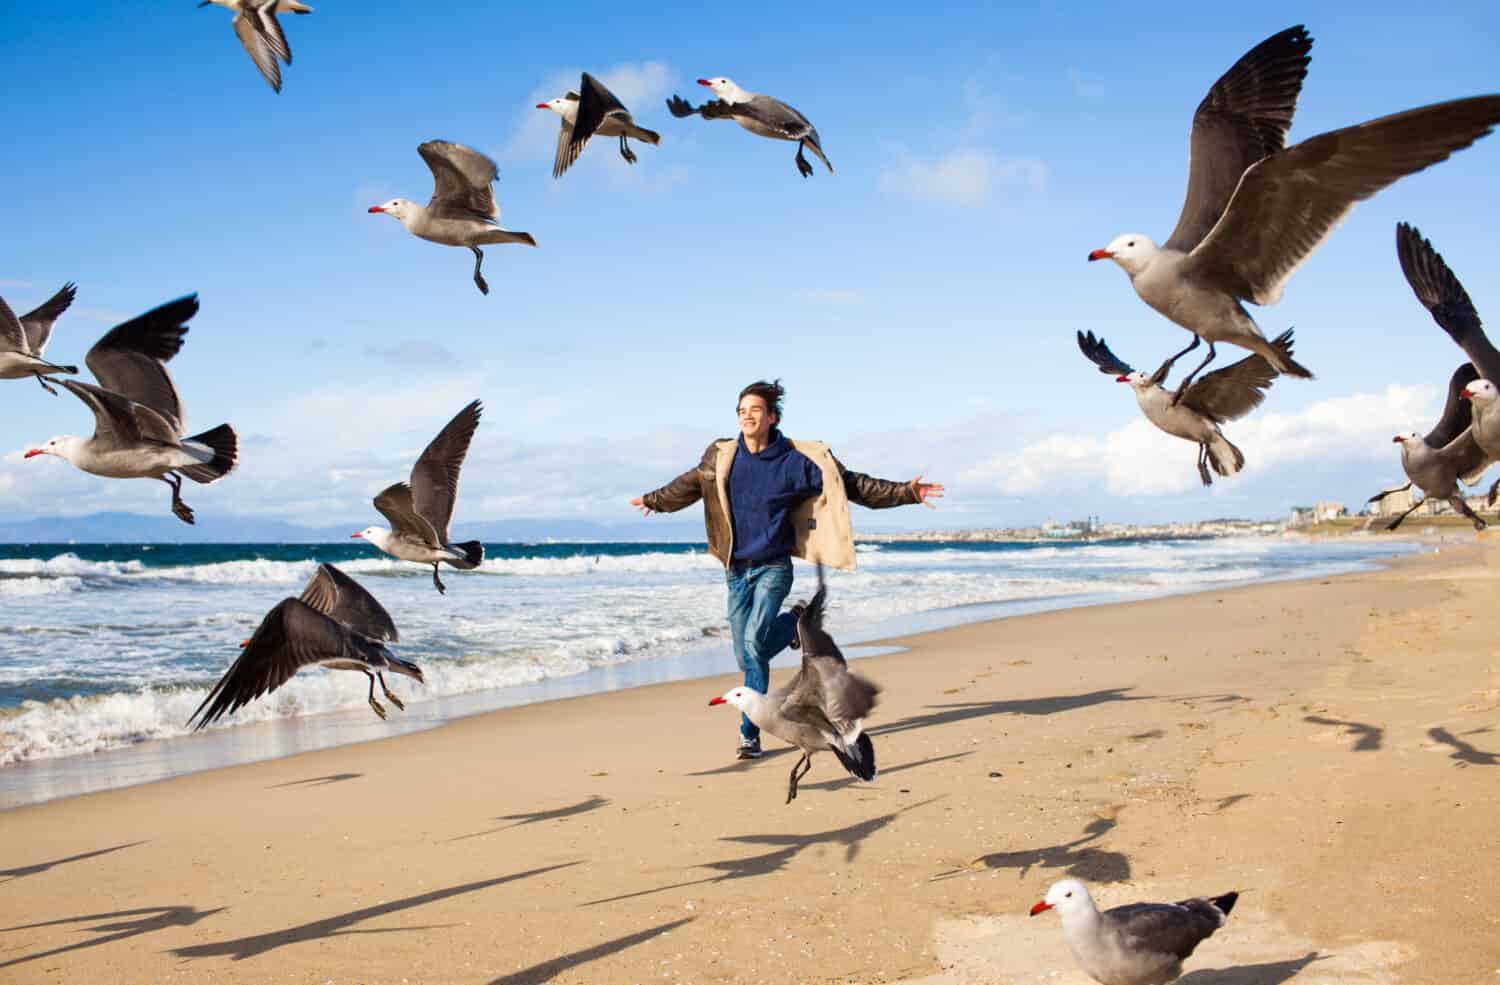 Free spirited young man running on the beach with the birds flying.